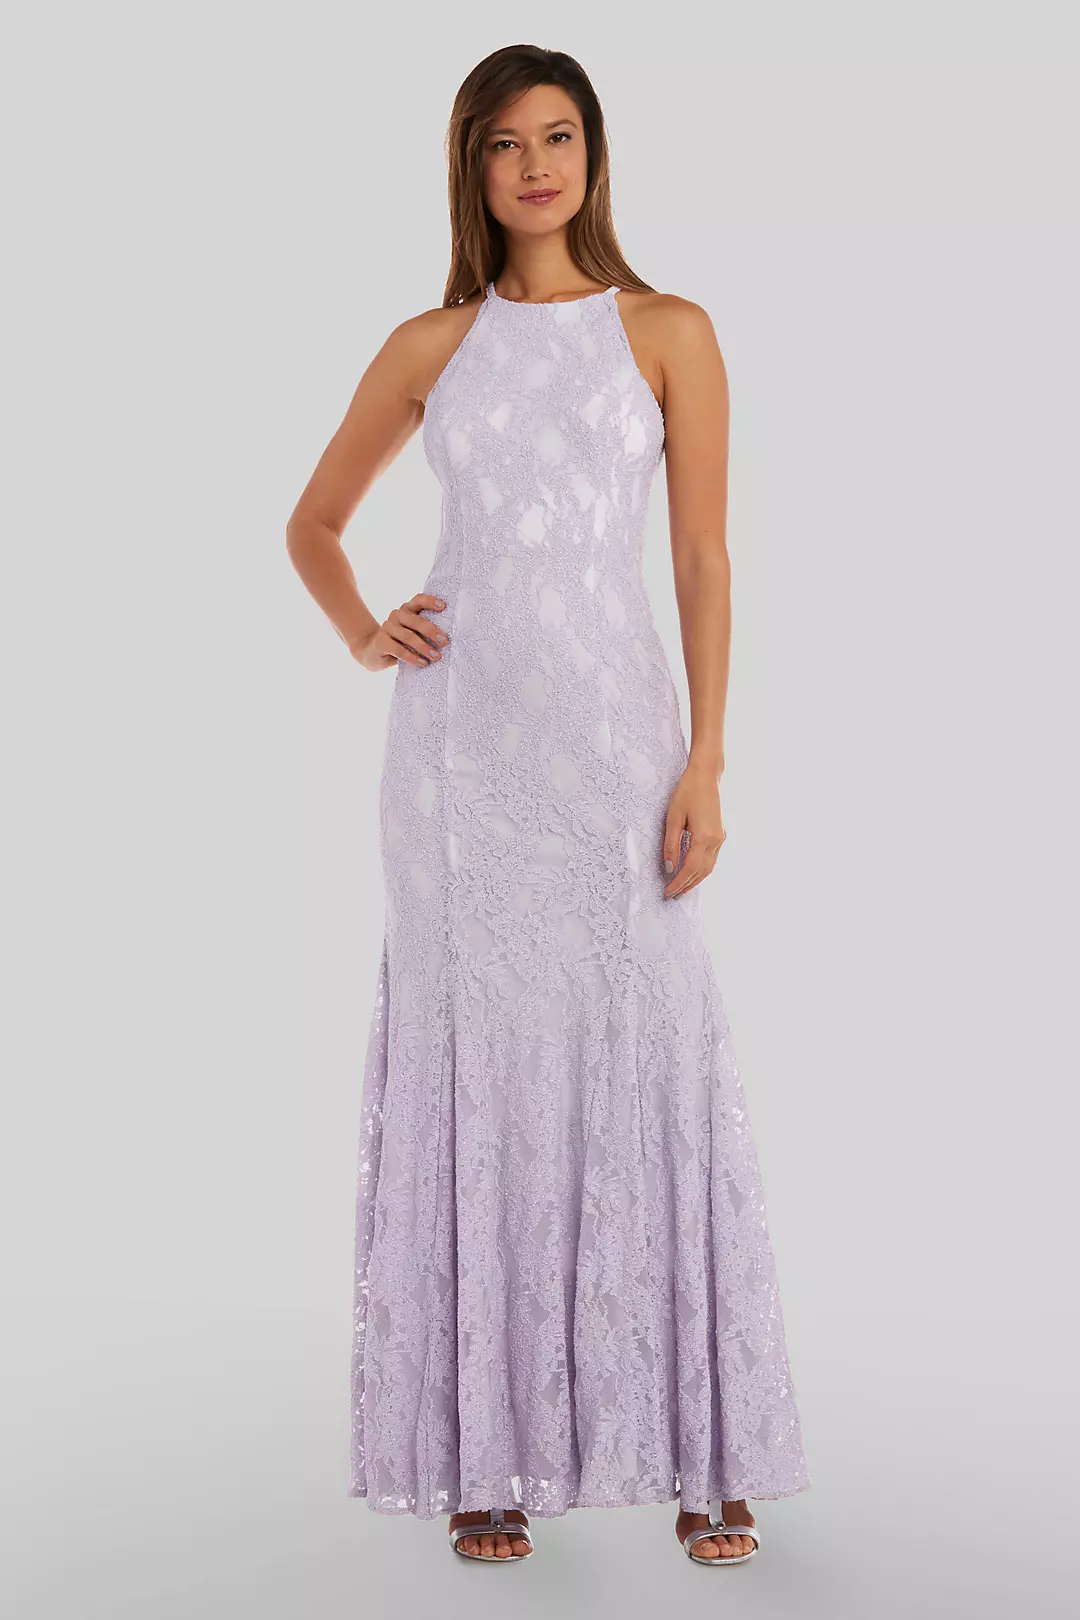 High Neck Lace Mermaid Gown with Scallop Trim Image